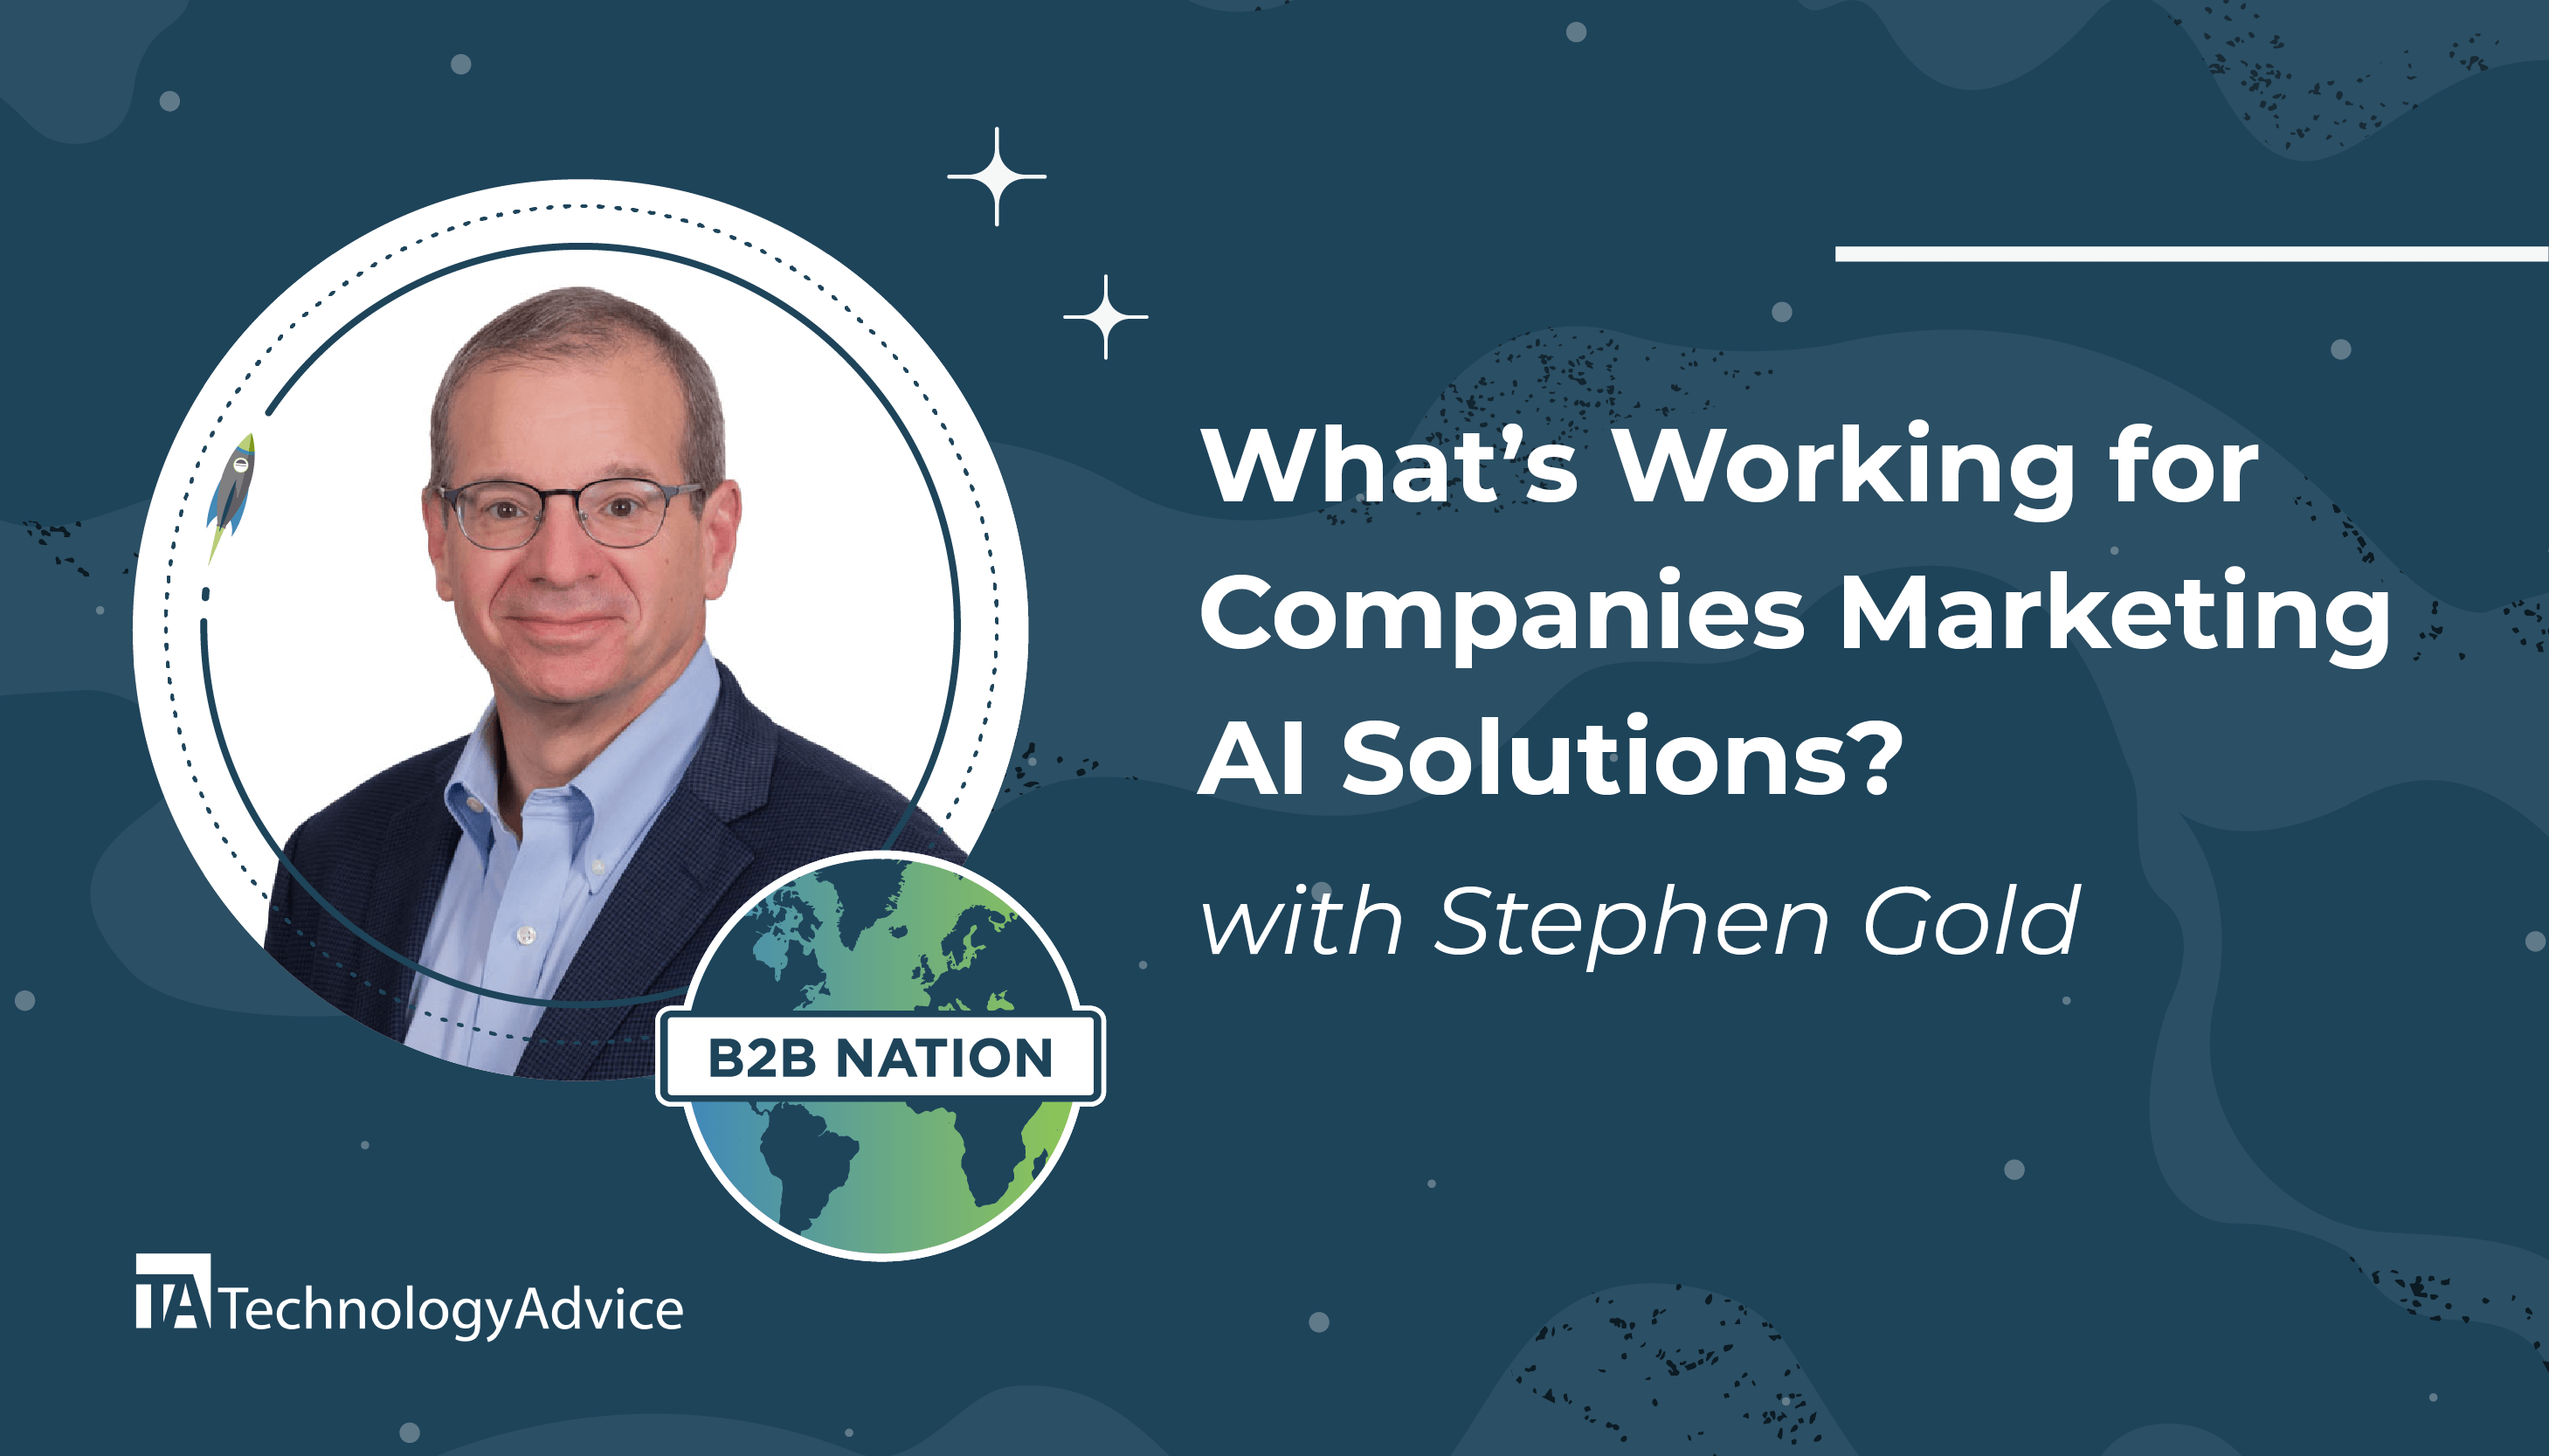 Stephen Gold, CMO of SparkCognition, talks about marketing AI technology on the B2B Nation podcast.